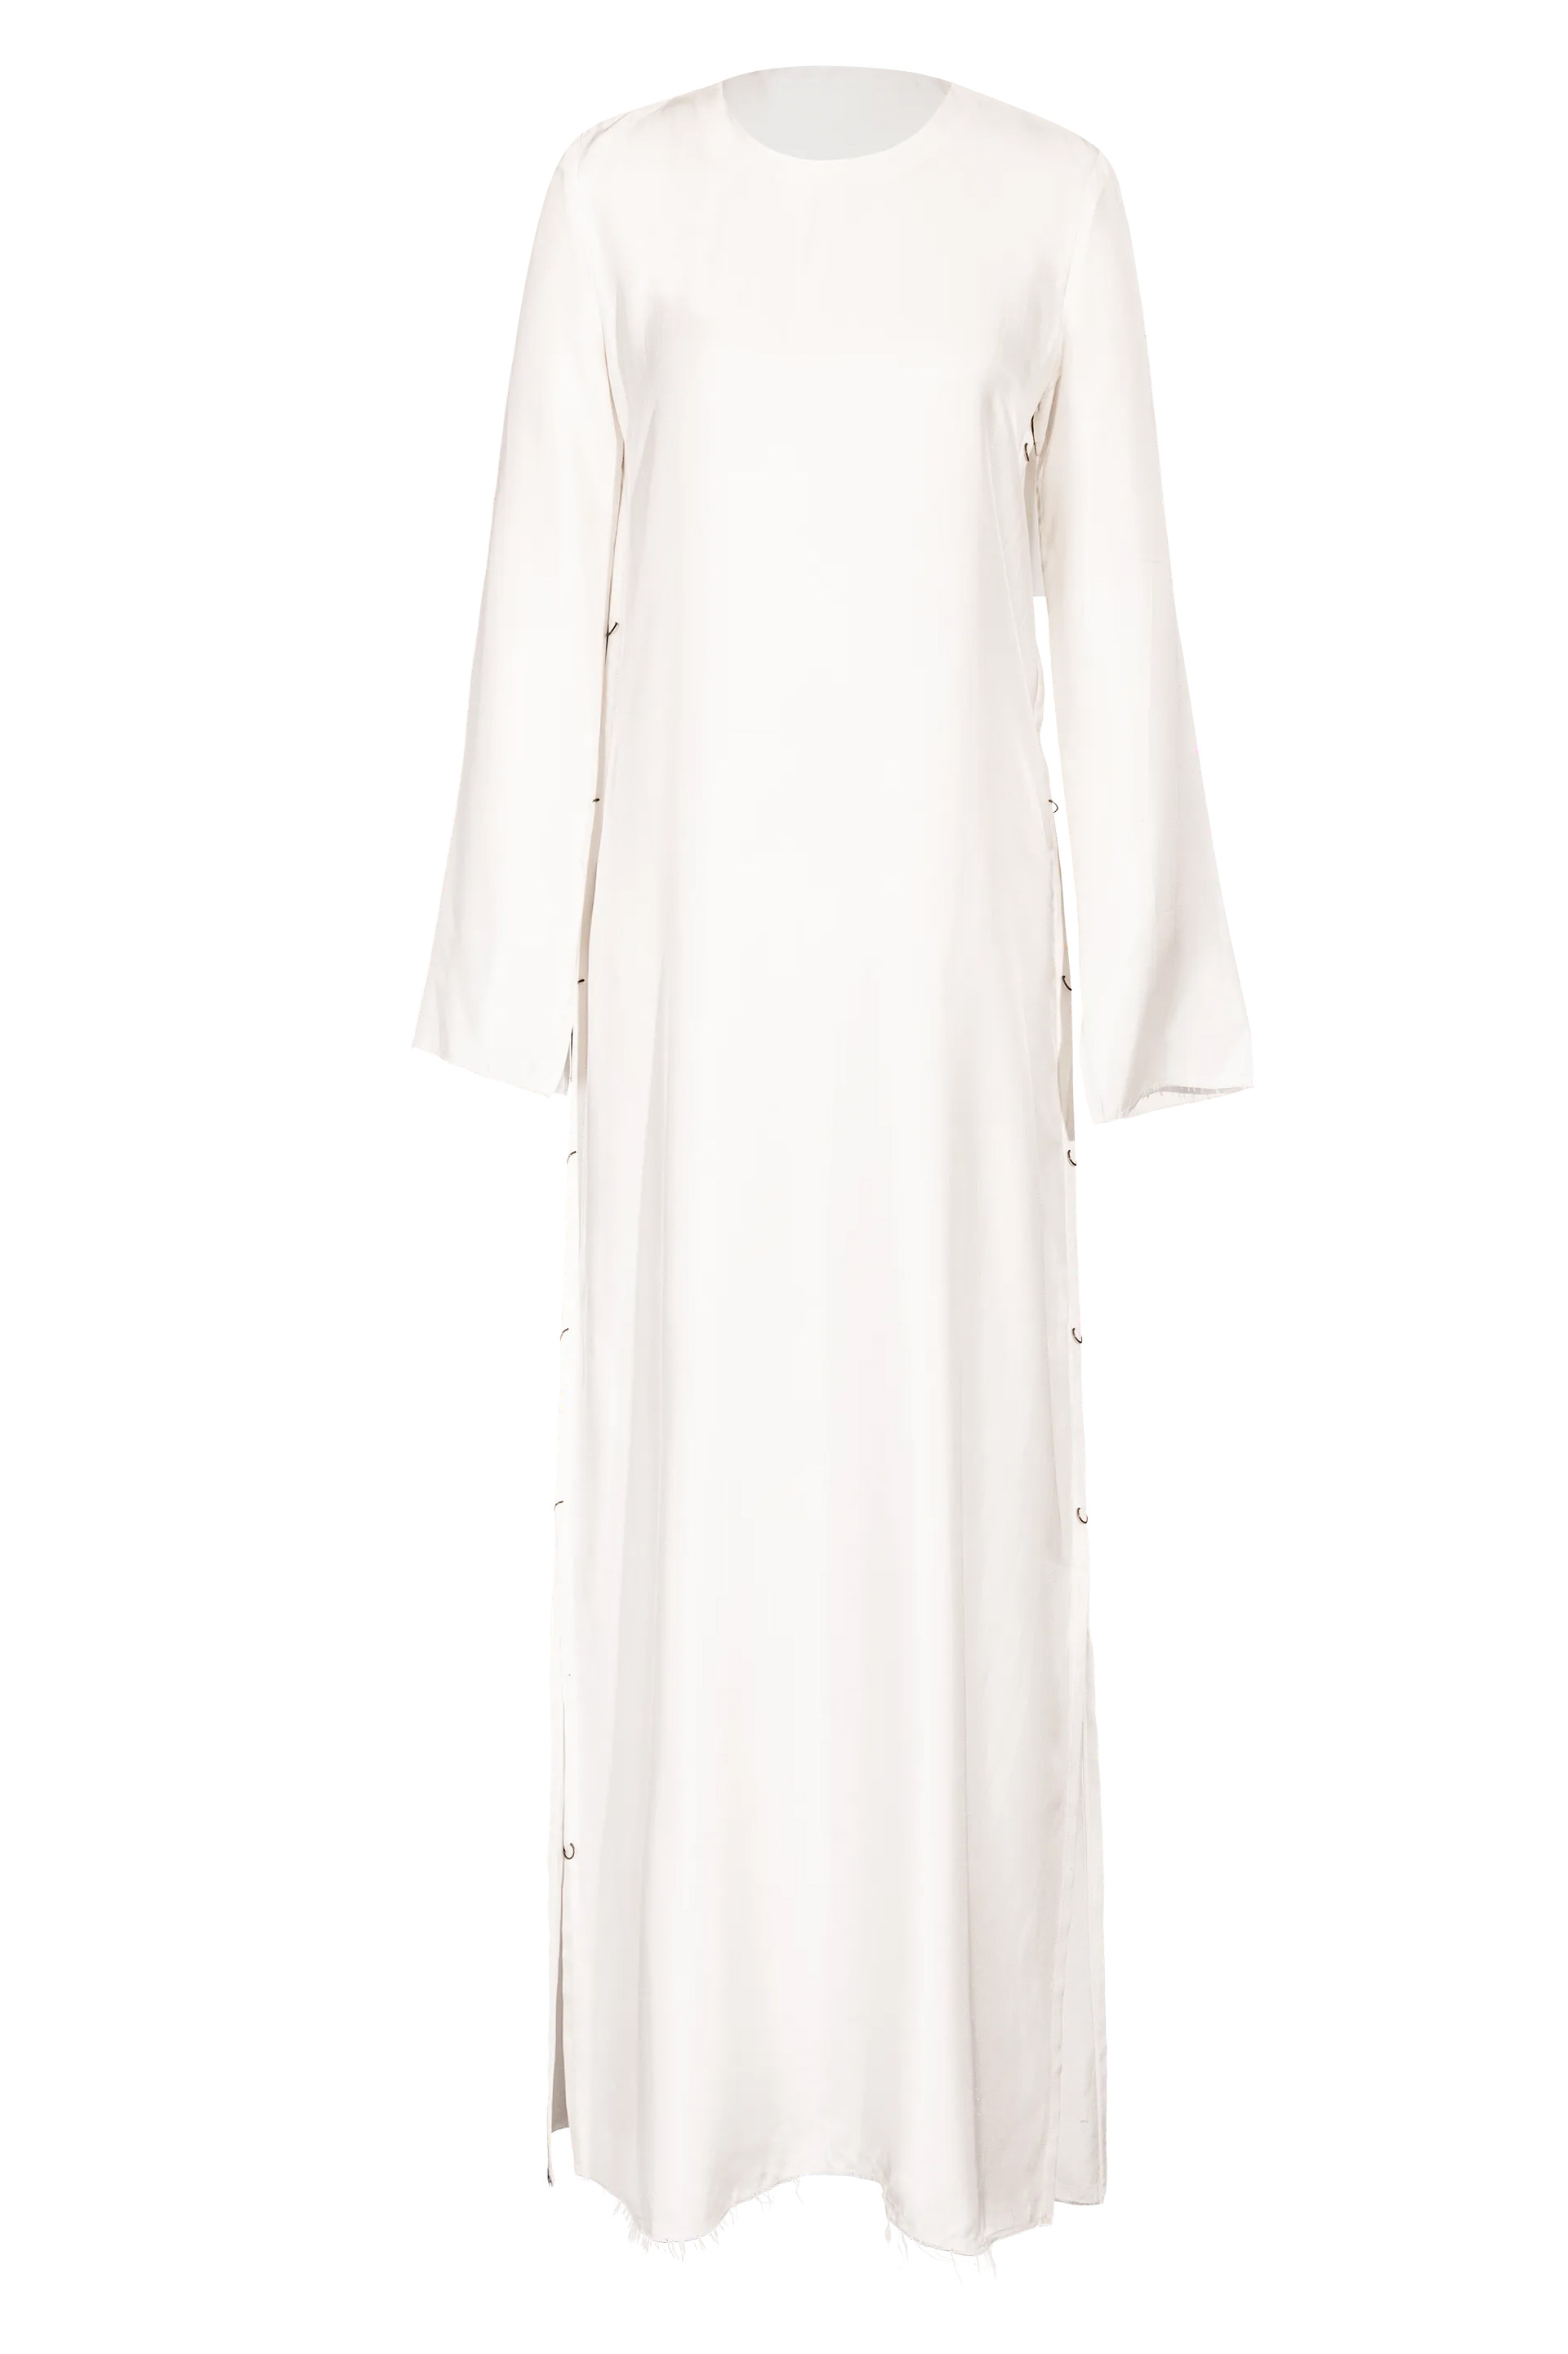 S/s 2016 White Silk Gown With Bronze Loop Side Details